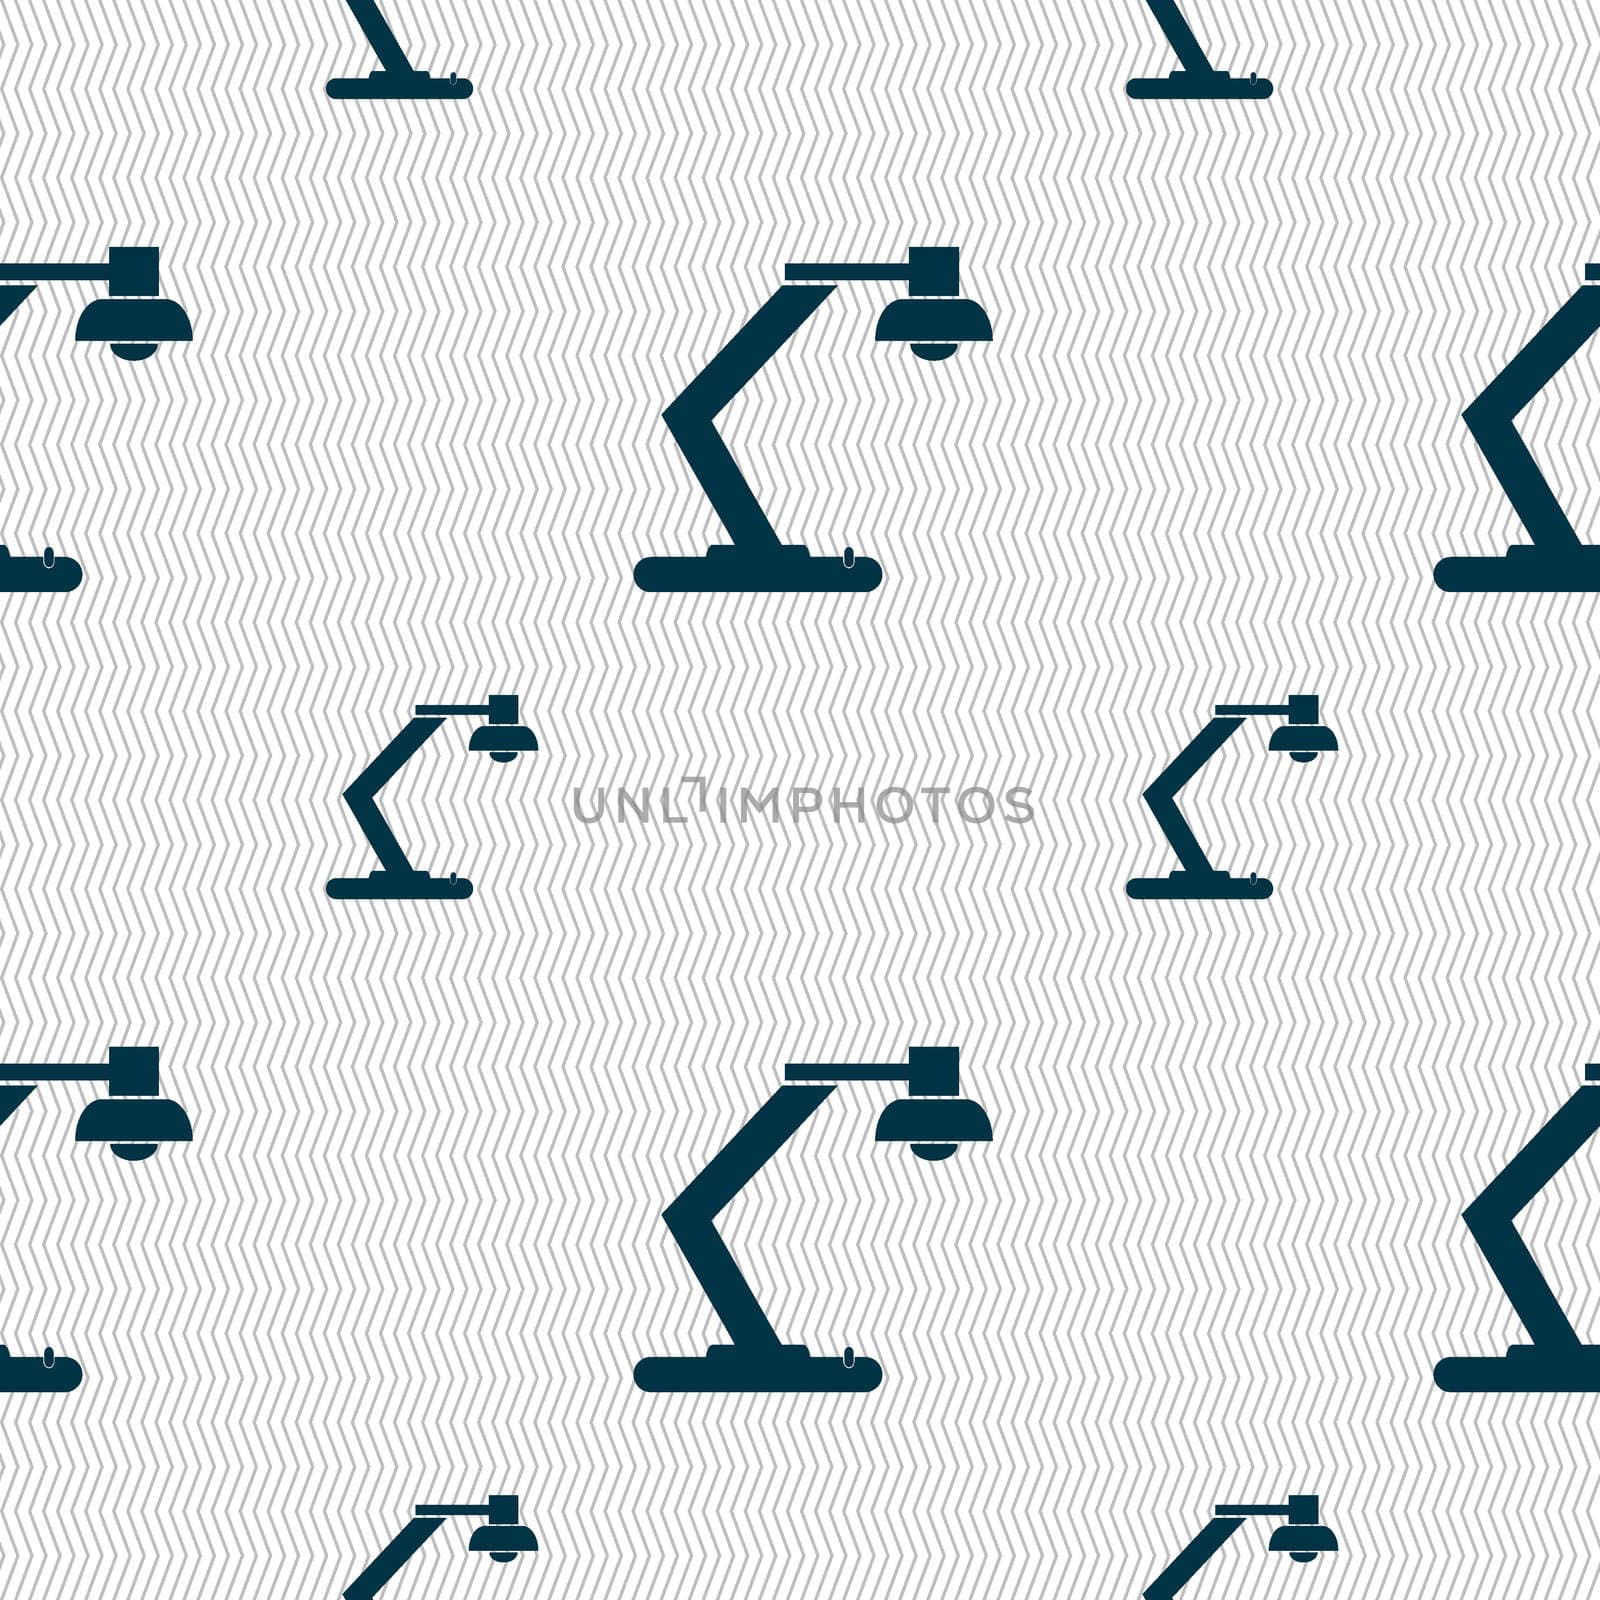 light, bulb, electricity icon sign. Seamless pattern with geometric texture. illustration